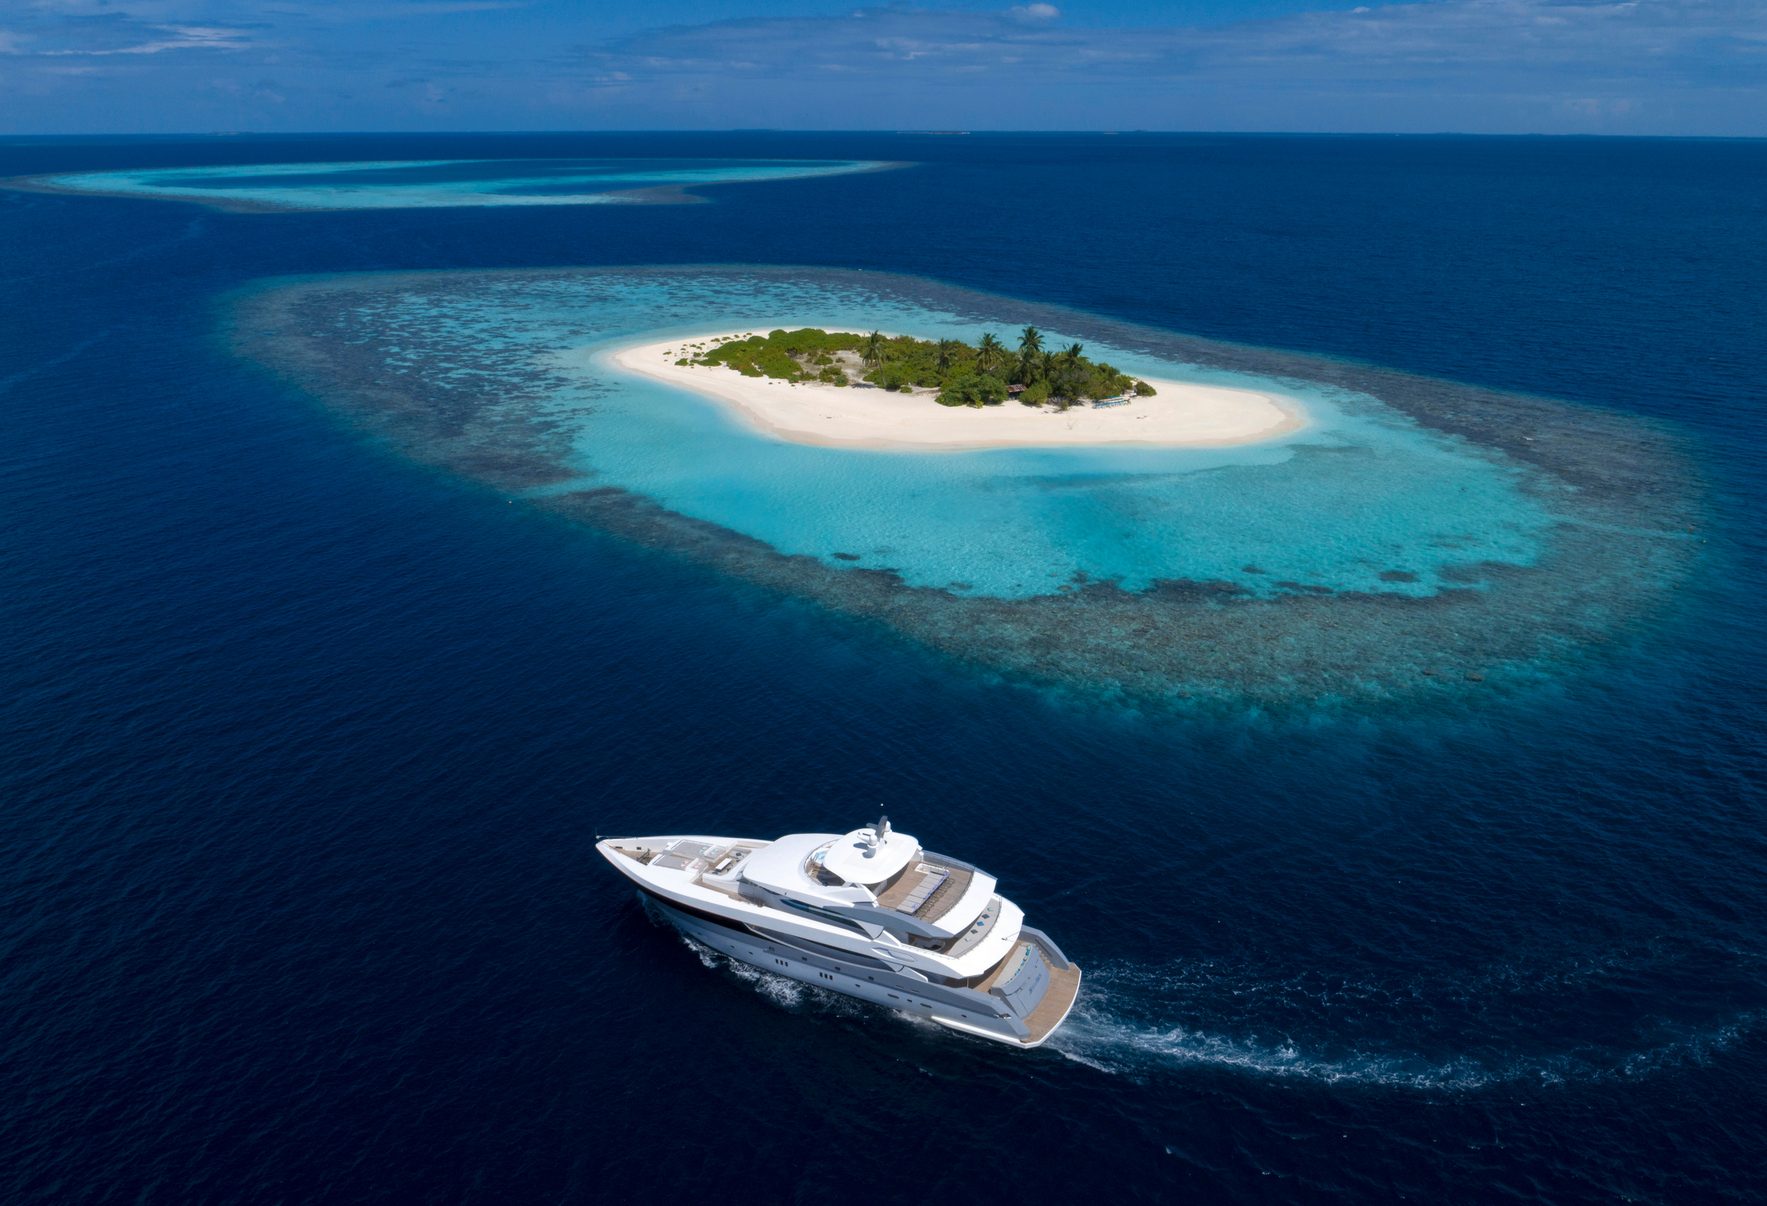 A sensational luxury charter yacht based in the Maldives, SEAREX is a 124ft...